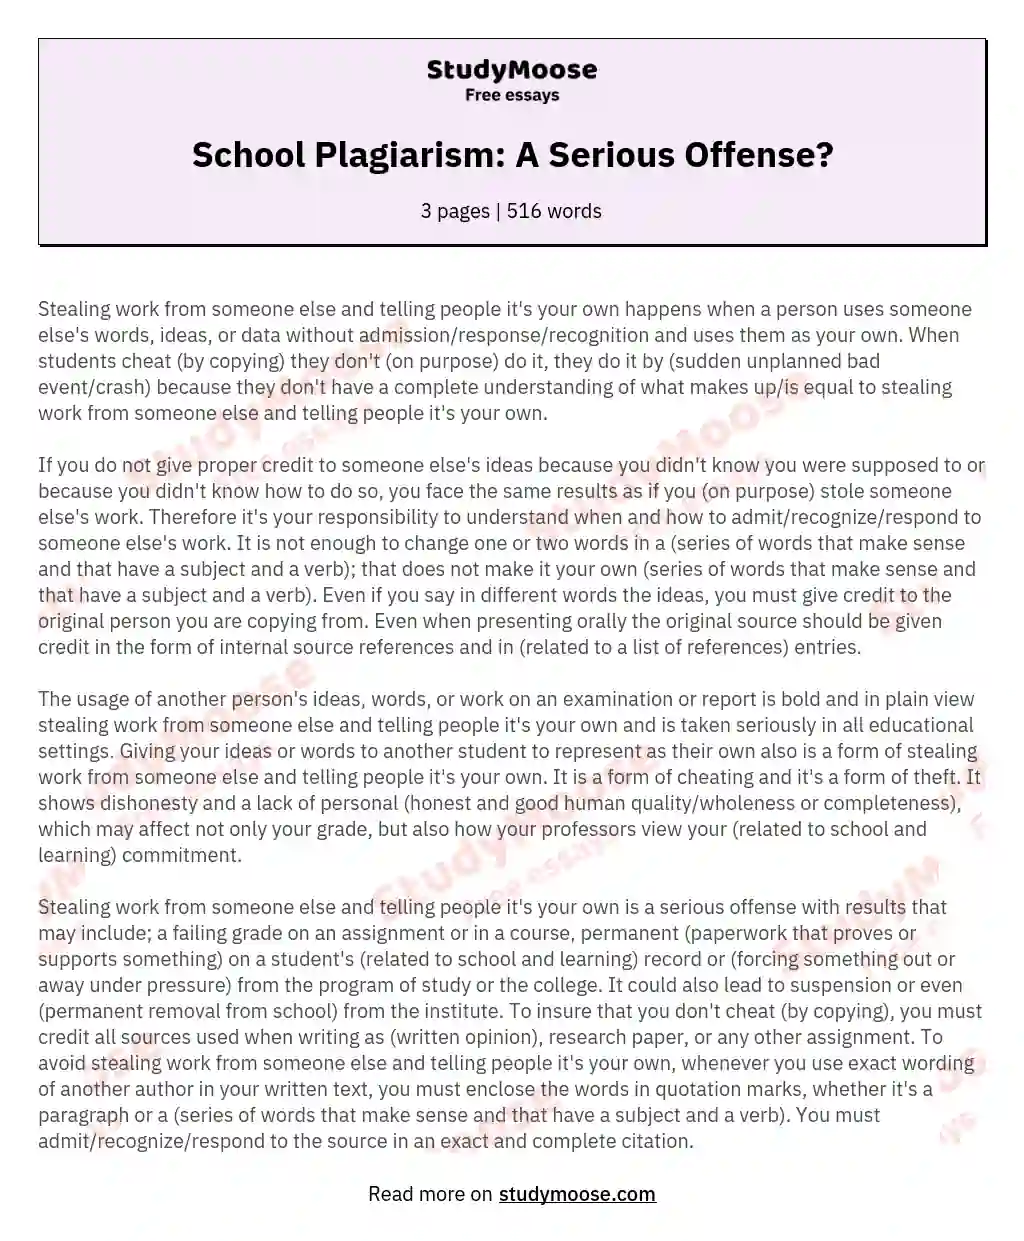 School Plagiarism: A Serious Offense? essay